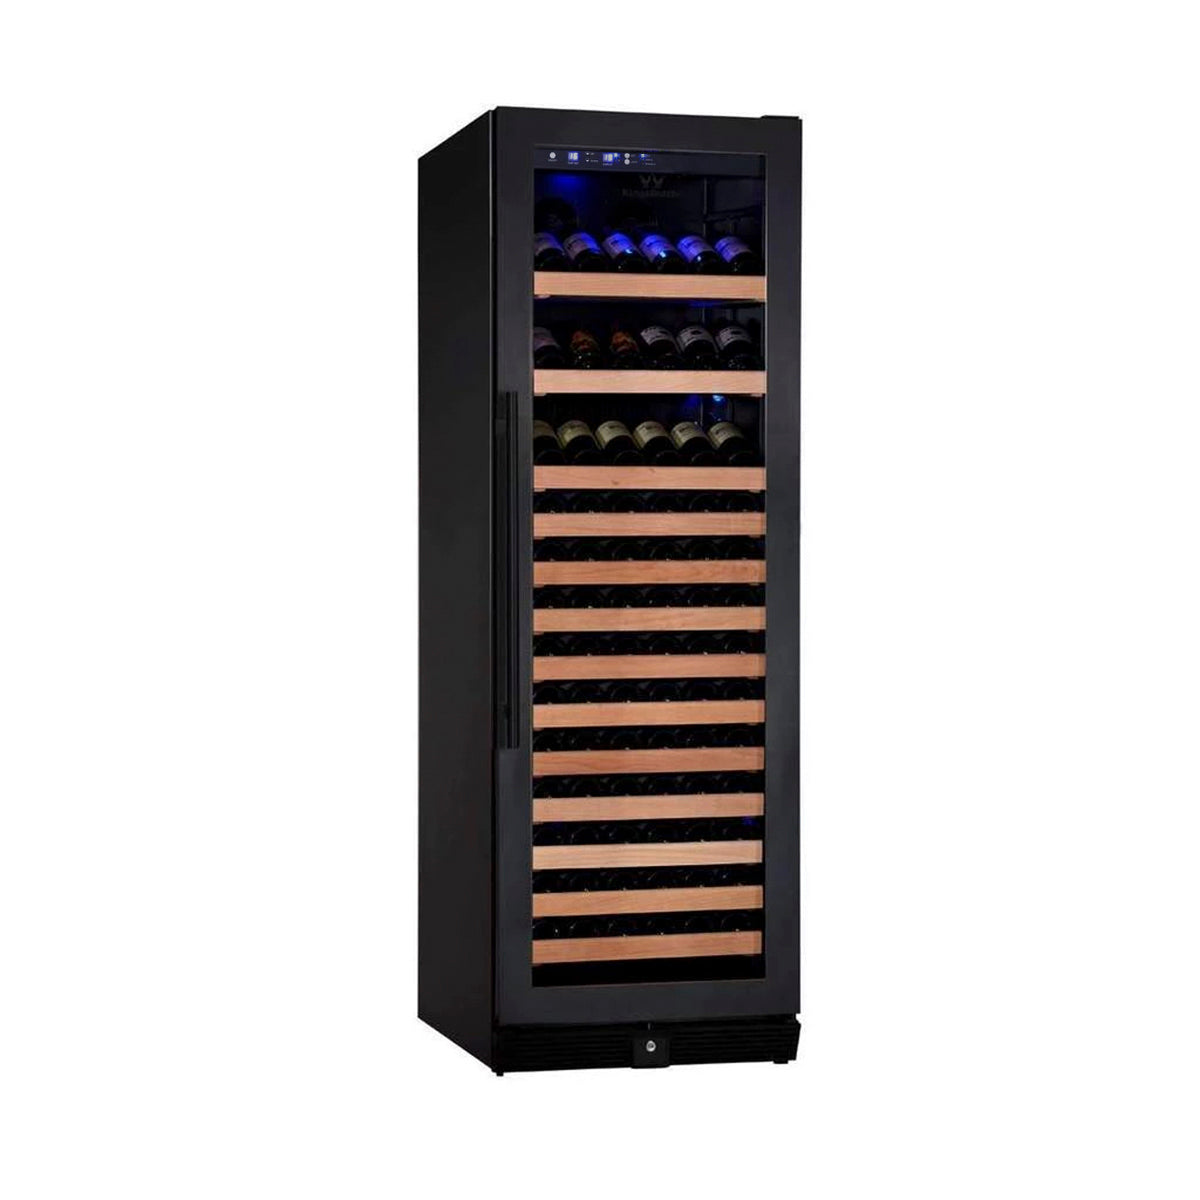 Tall Large Wine Cooler Refrigerator Drinks Cabinet with Stainless Steel Trim